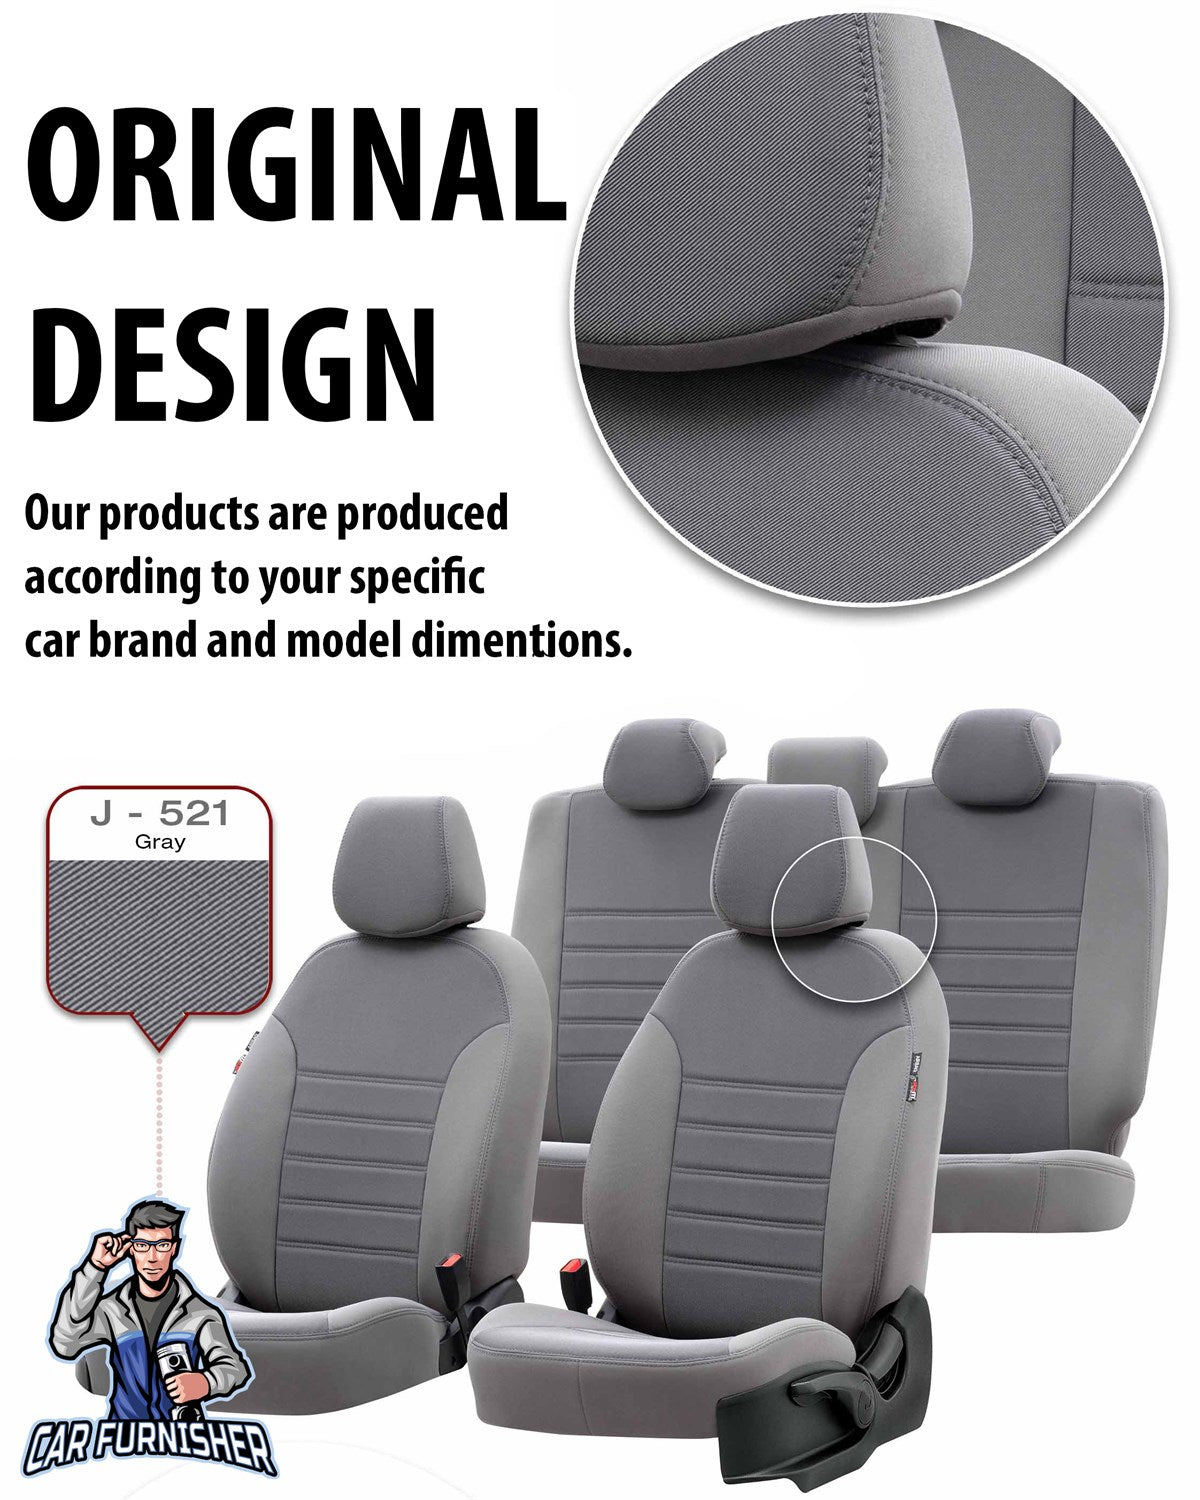 Nissan NV300 Seat Cover New York Leather Design Smoked Jacquard Fabric